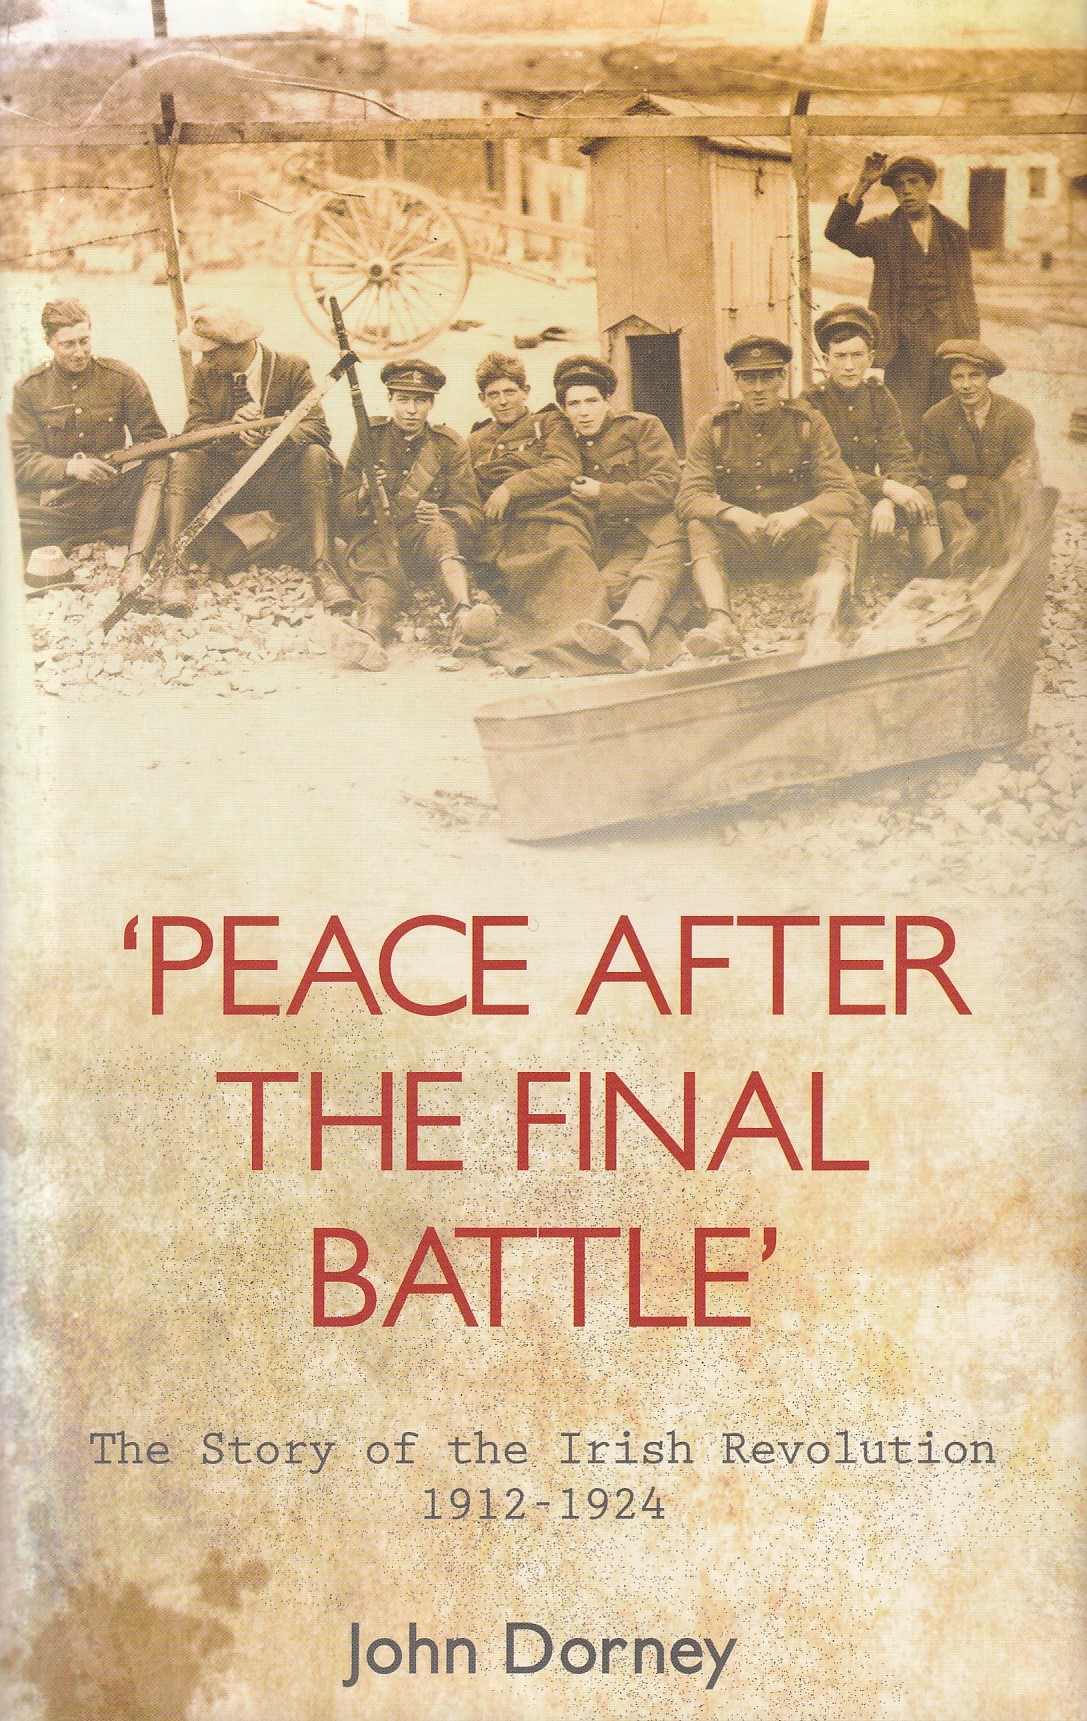 ‘Peace after the Final Battle’: The Story of the Irish Revolution 1912-1924 by John Dorney